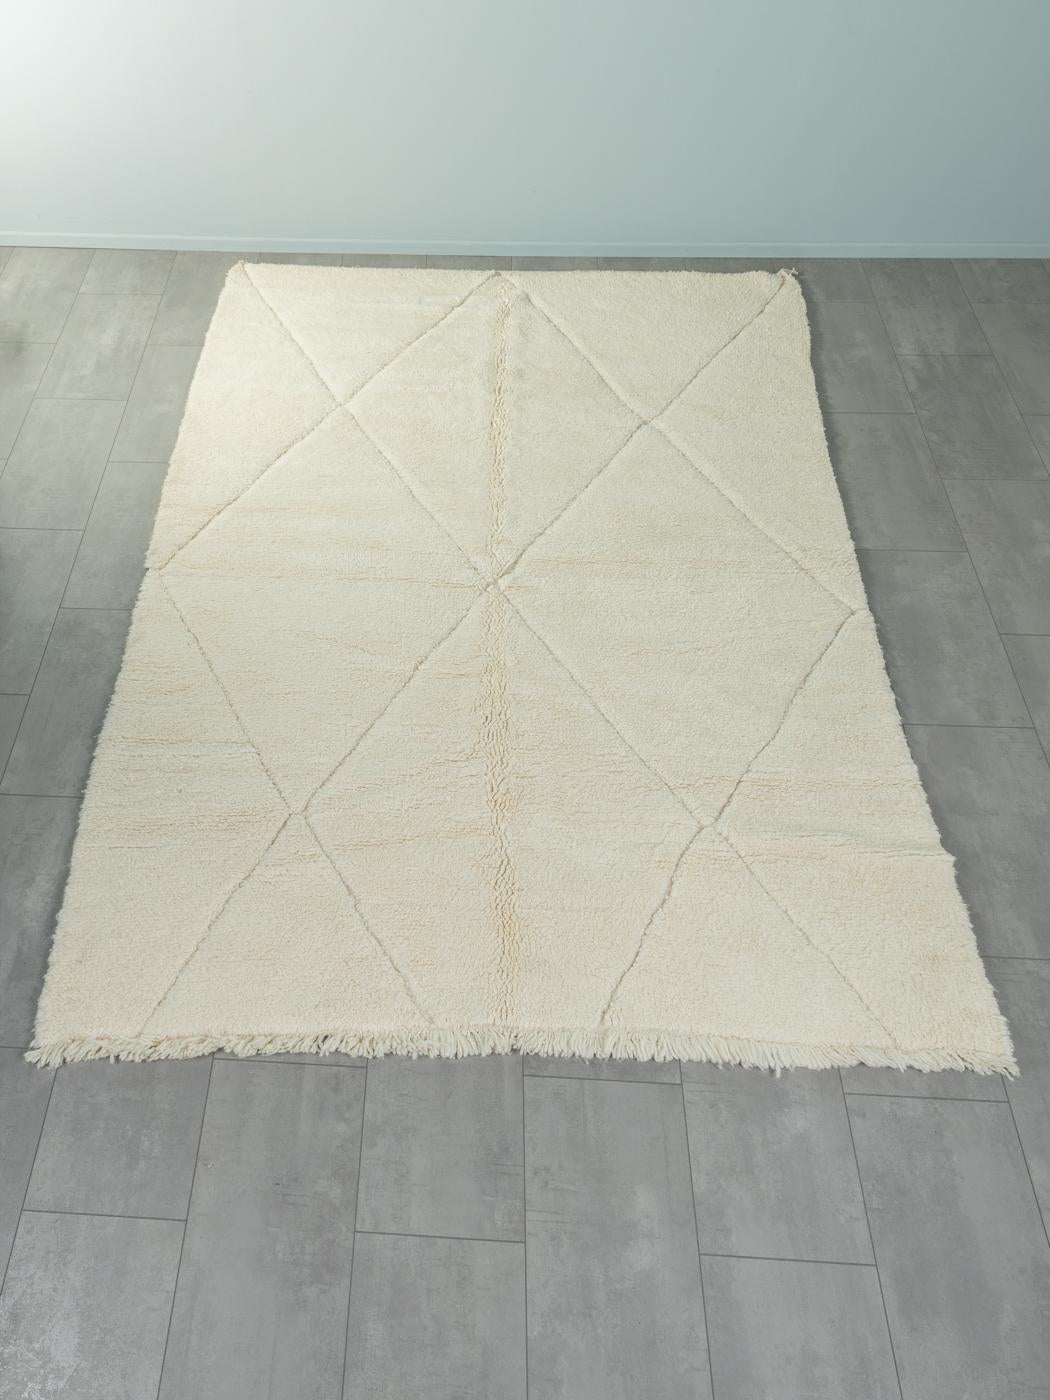 Light Beni II is a contemporary 100% wool rug – thick and soft, comfortable underfoot. Our Berber rugs are handwoven and handknotted by Amazigh women in the Atlas Mountains. These communities have been crafting rugs for thousands of years. One knot